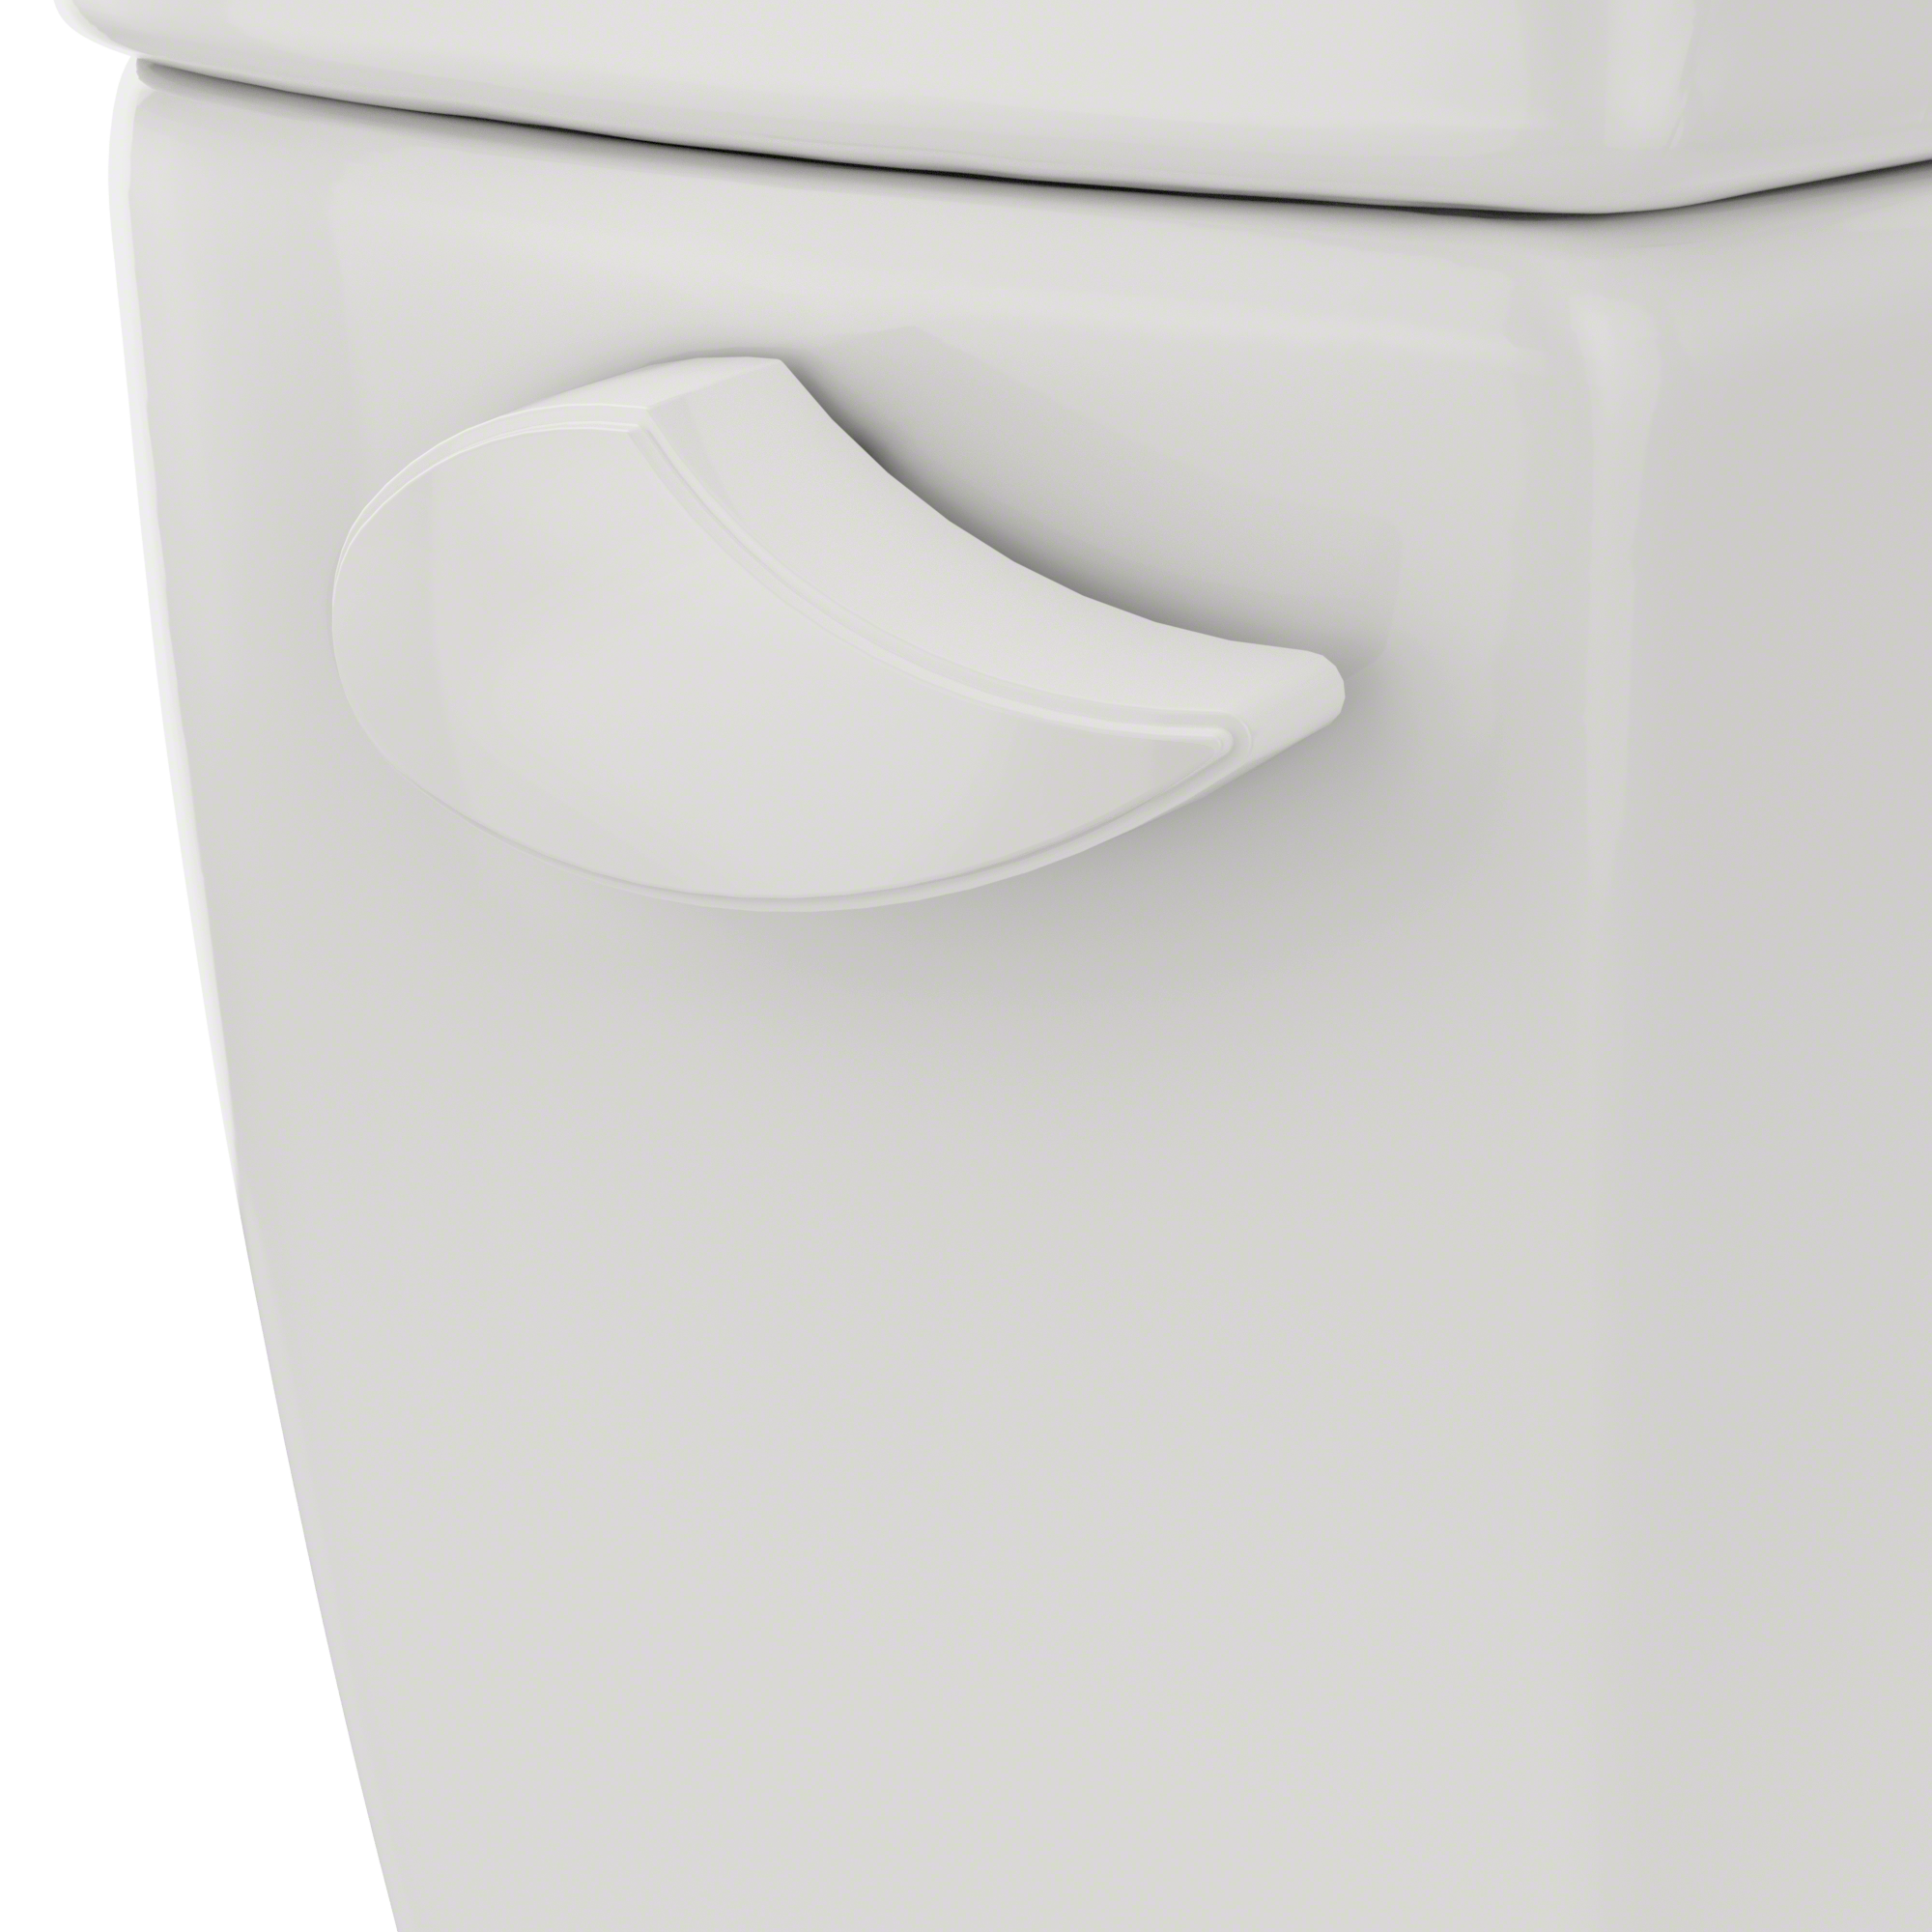 Toto®Trip Lever - Colonial White For Cst704.14, Carolina, Ultimate, Ultramax Toilet-THU004#11